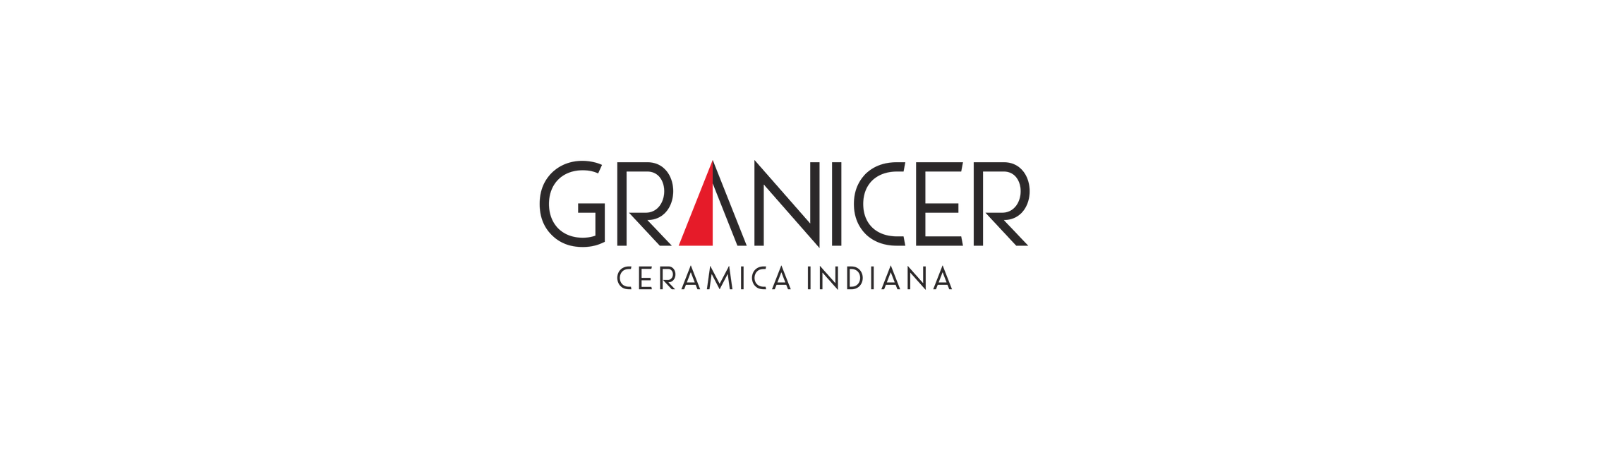 Granicer: outstanding technology from SACMI delivers exclusive quality and design